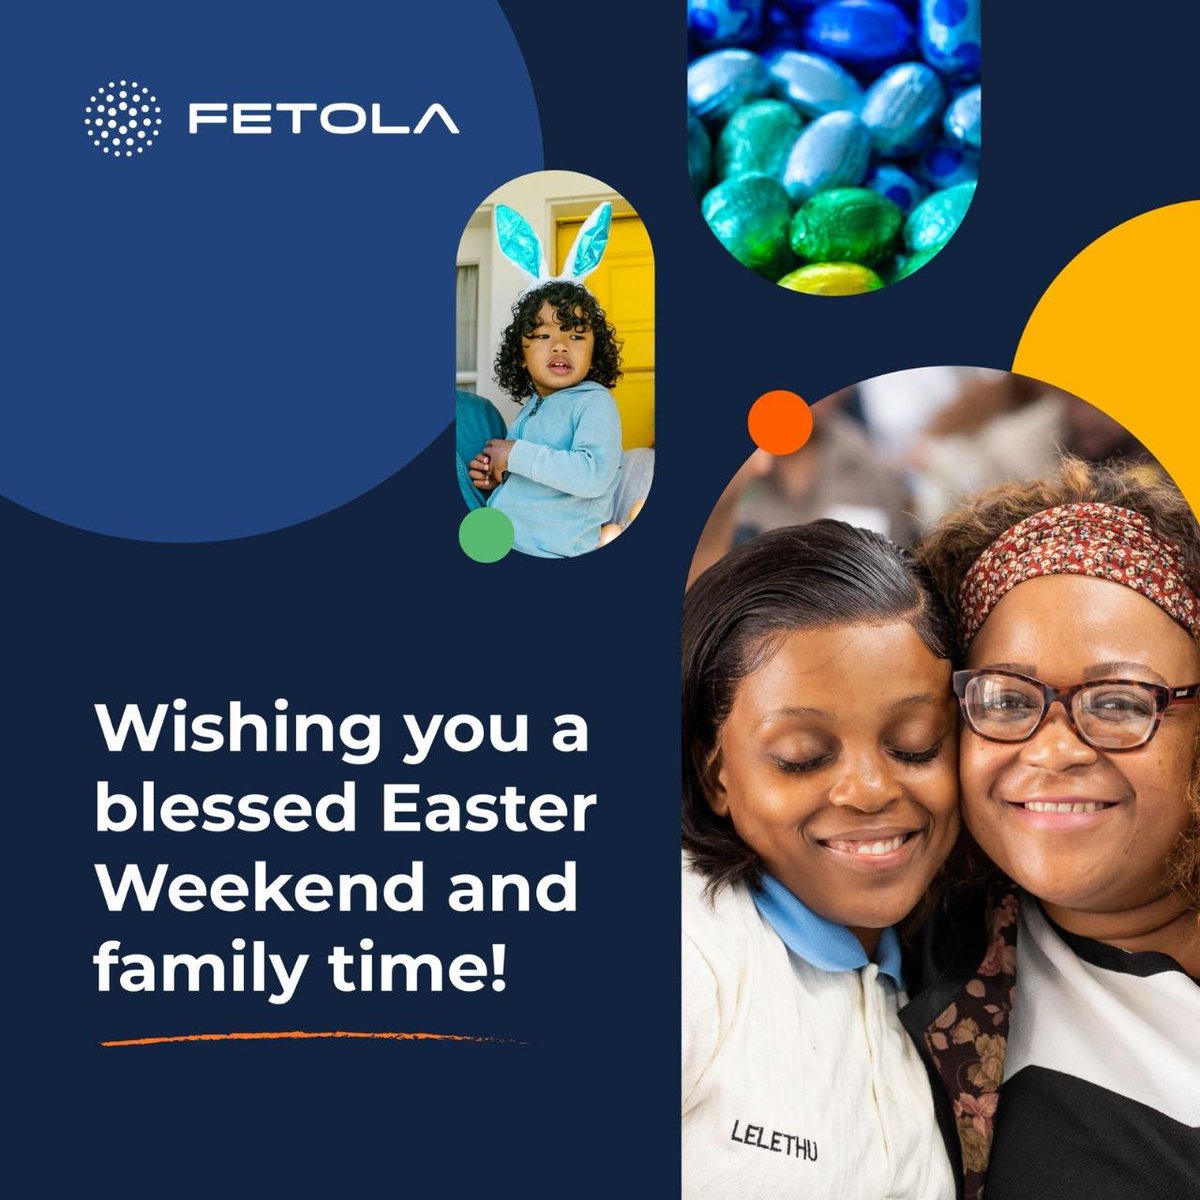 Happy Easter from Fetola! 😇 Wishing you an egg-straordinary Easter filled with joy, love, and hope. May this time bring renewed spirits and cherished moments with loved ones. 🐣❤️ #FetolaFamily #Easter